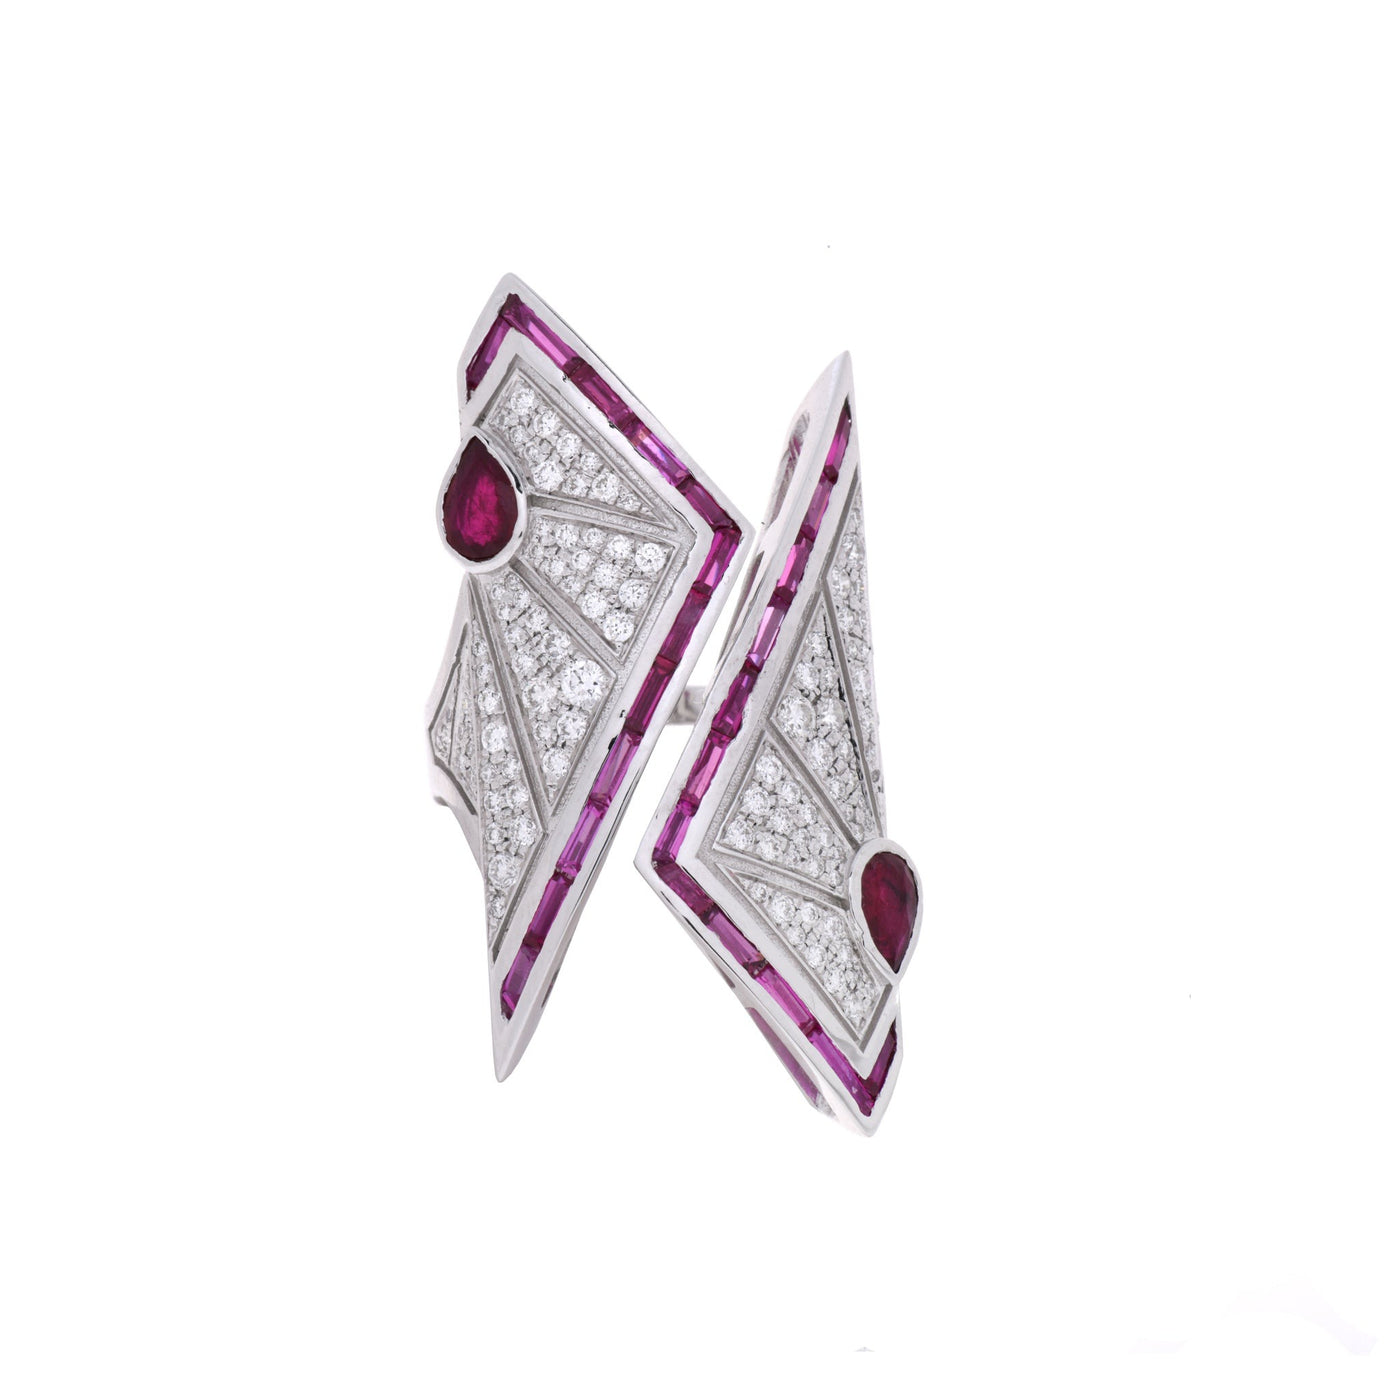 Soit Belle White Gold Pointed Diamond Ring With Natural Ruby: Elegant Contrast